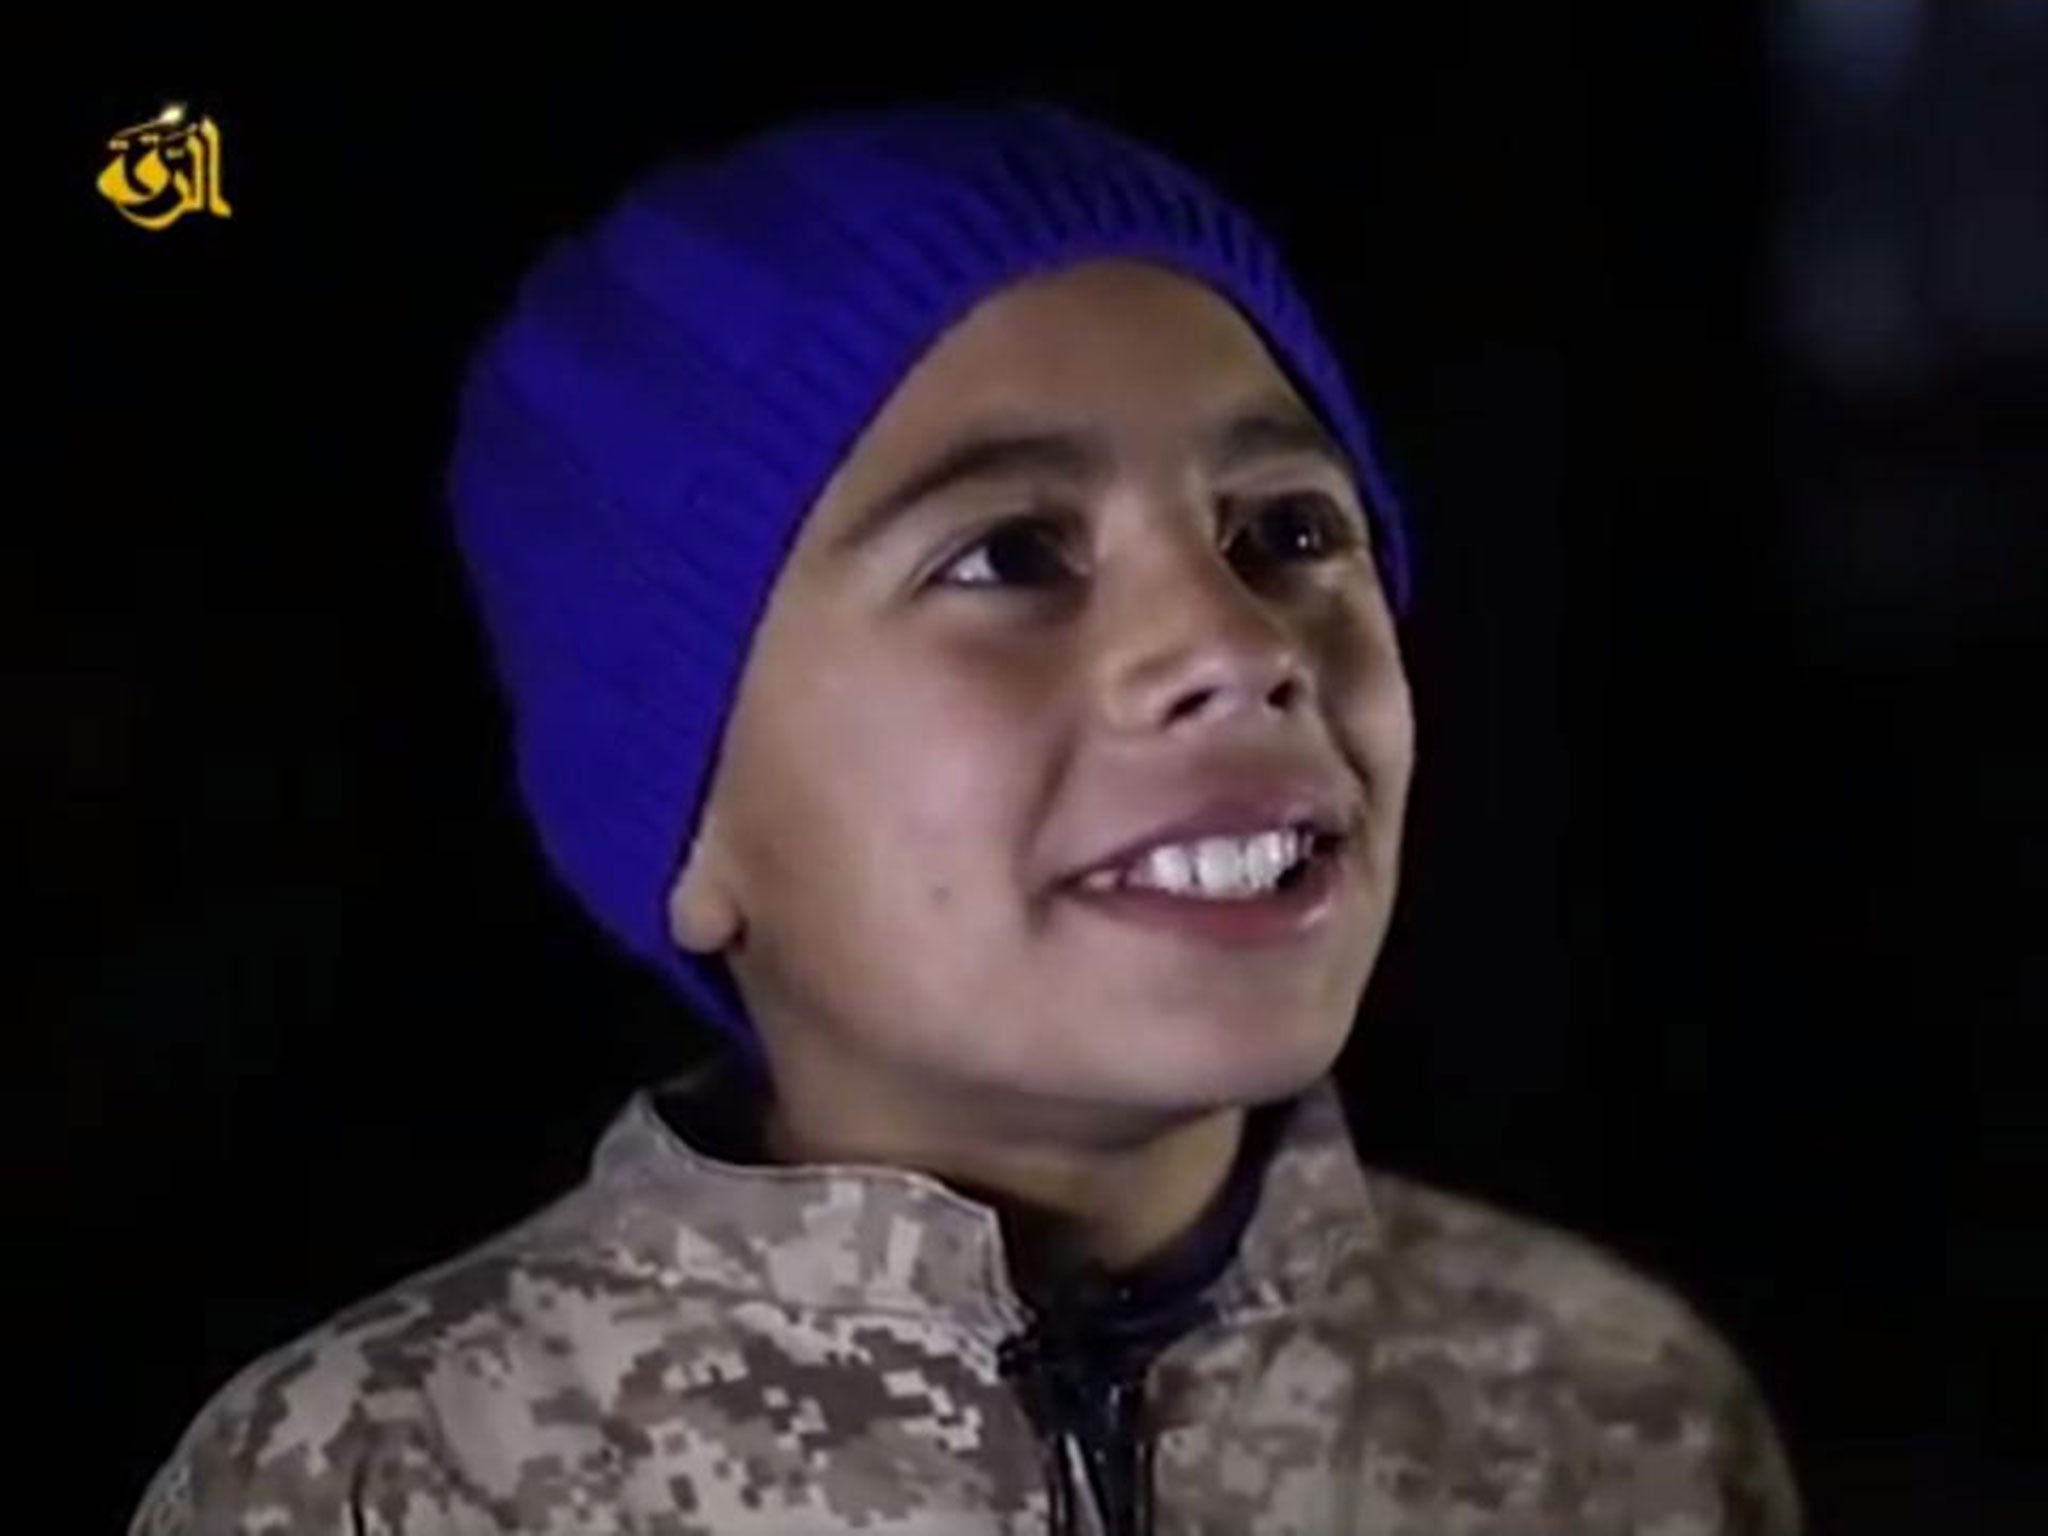 A young boy interviewed in the video after watching the pilot's death